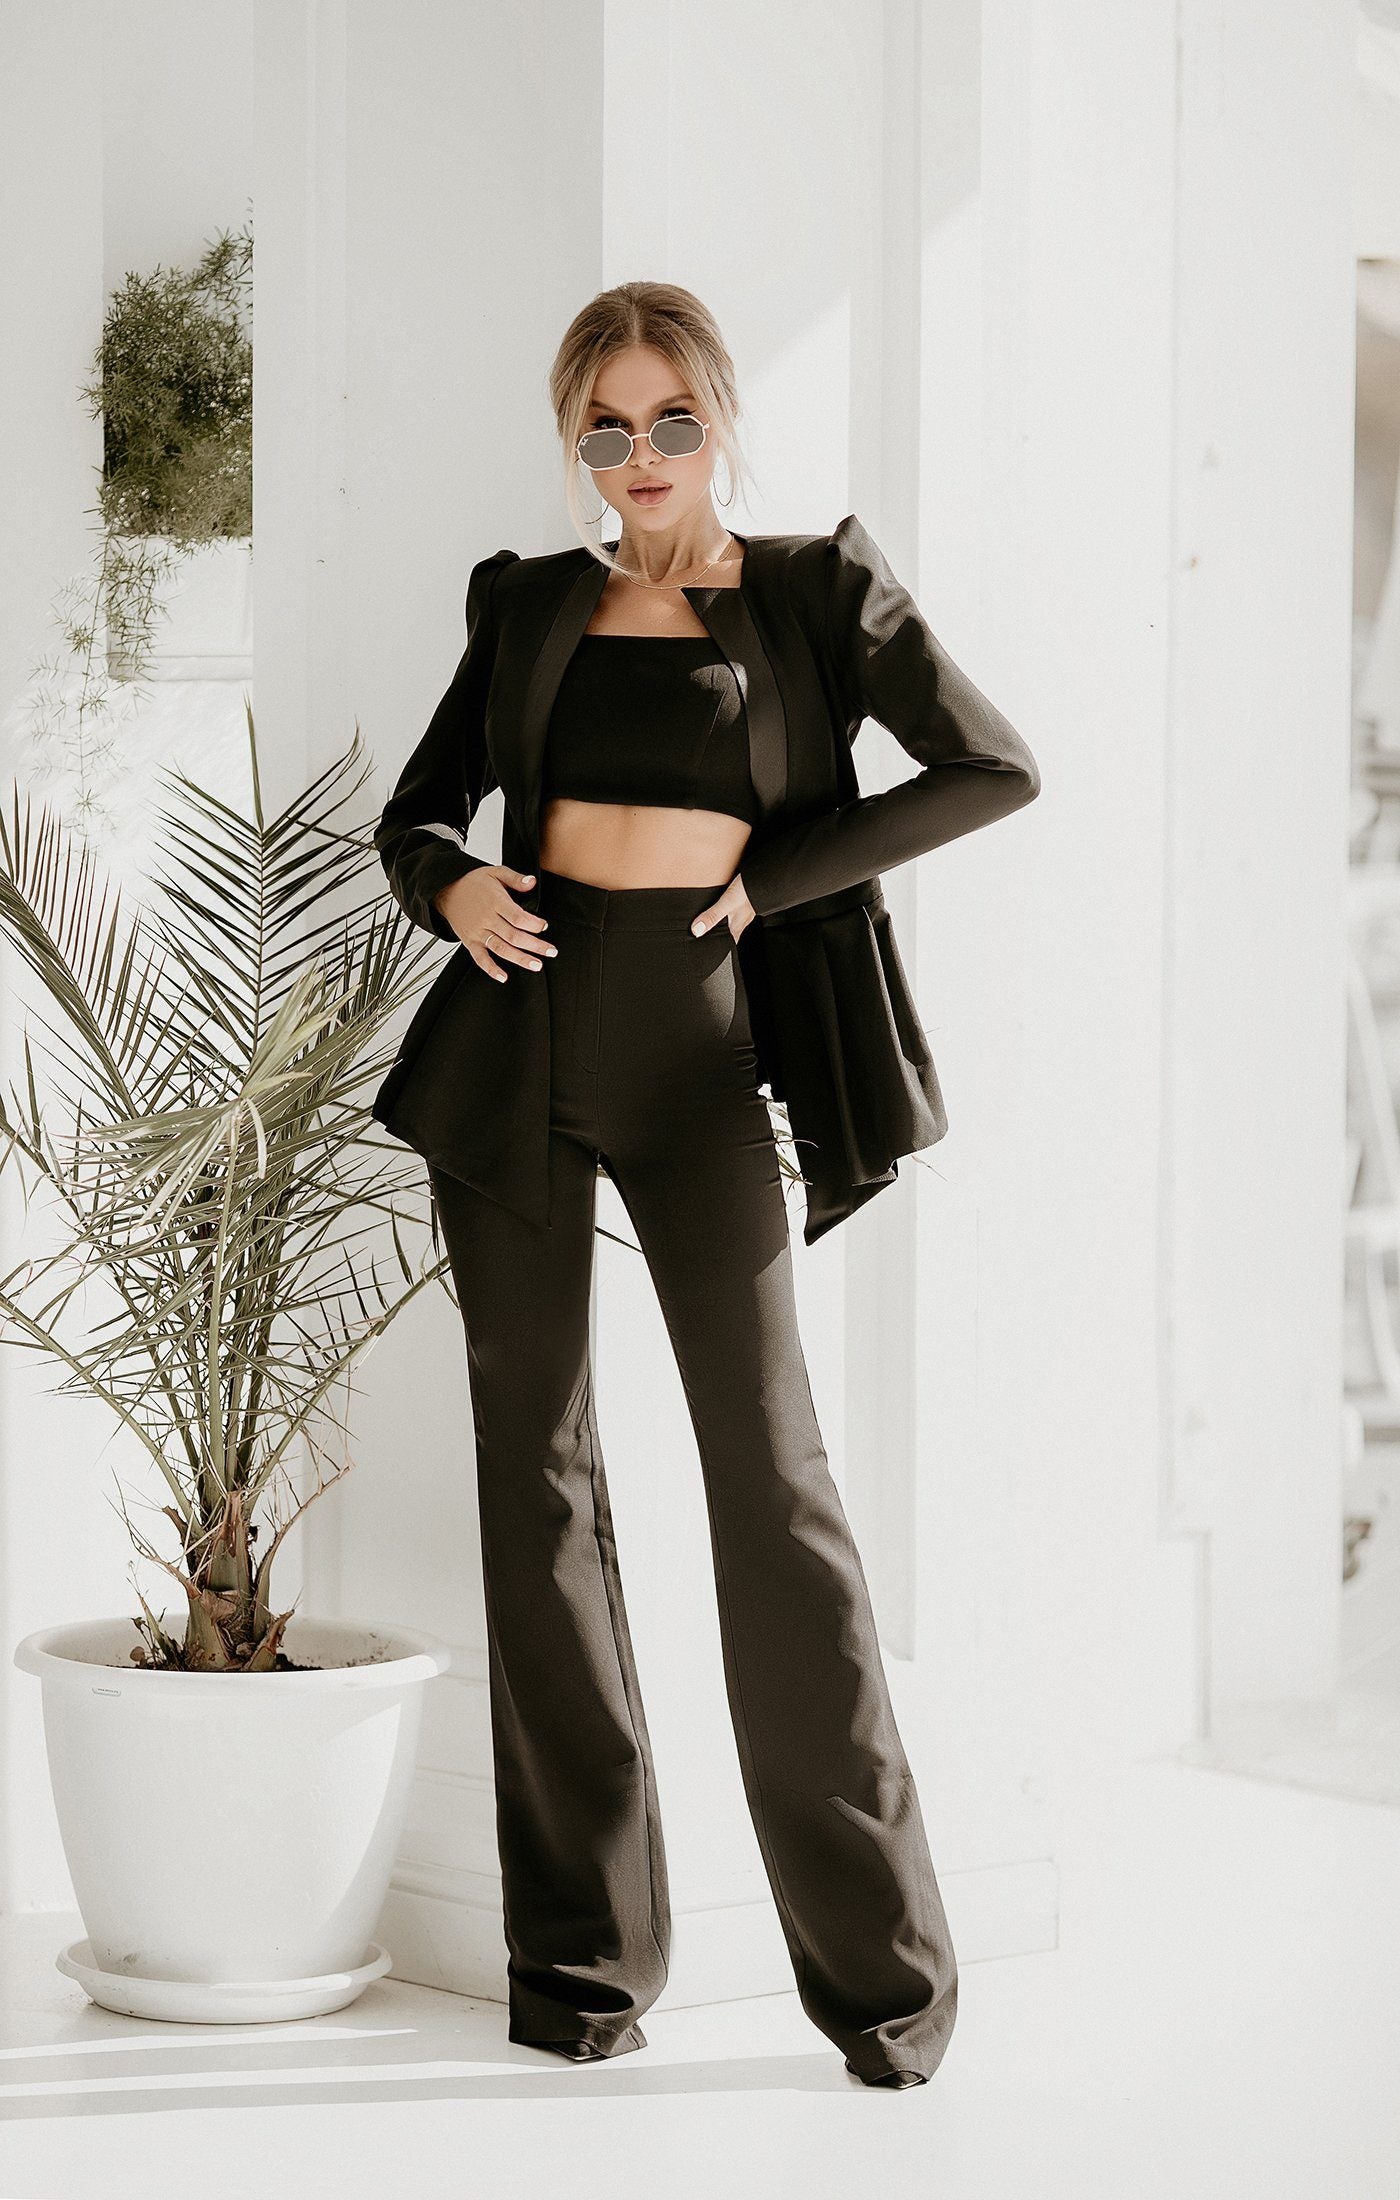 trinarosh Black Promo Suit 2-Piece With Basque And Flared Pants